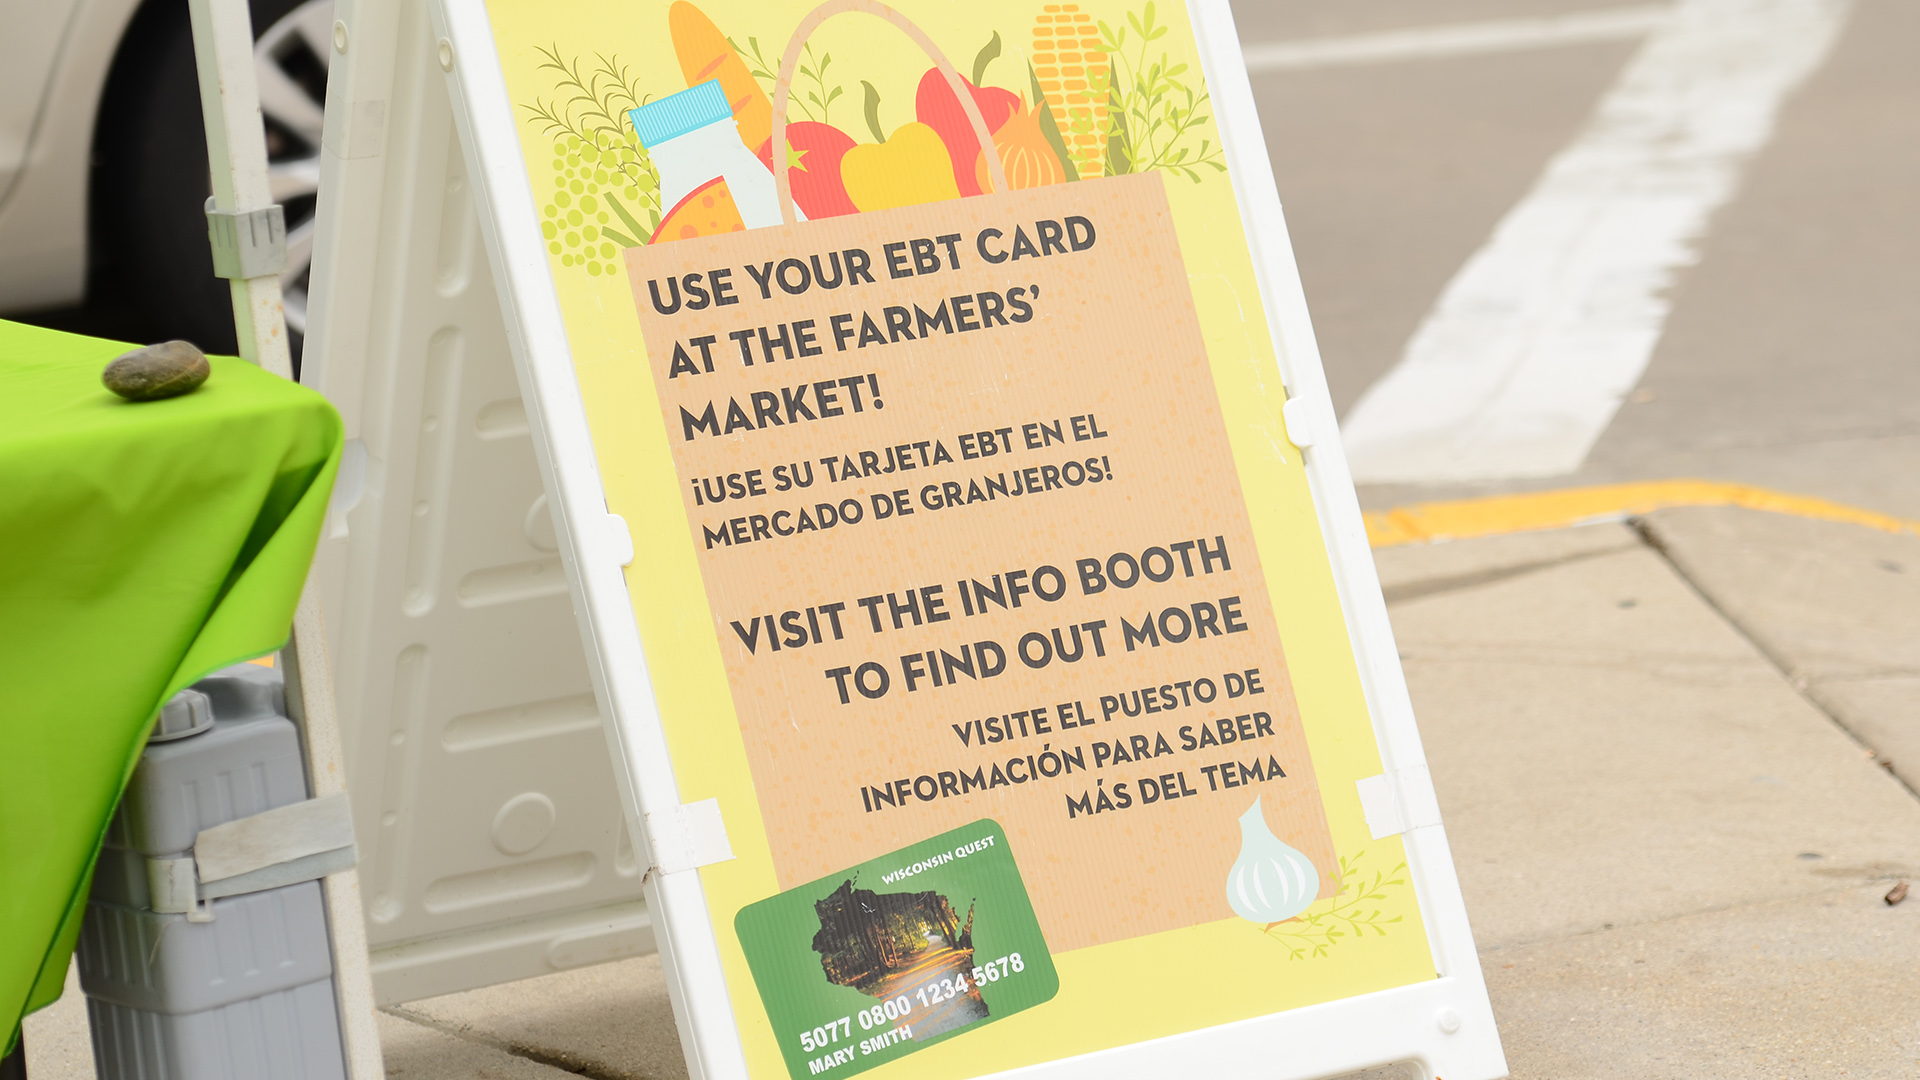 A sandwich board sign on a sidewalk shows an illustration of a paper grocery bag filled with food items, with the words "Use Your EBT Cart at the Farmers' Market" and "¡Use su tarjeta EBT en el mercado de granjeros!"